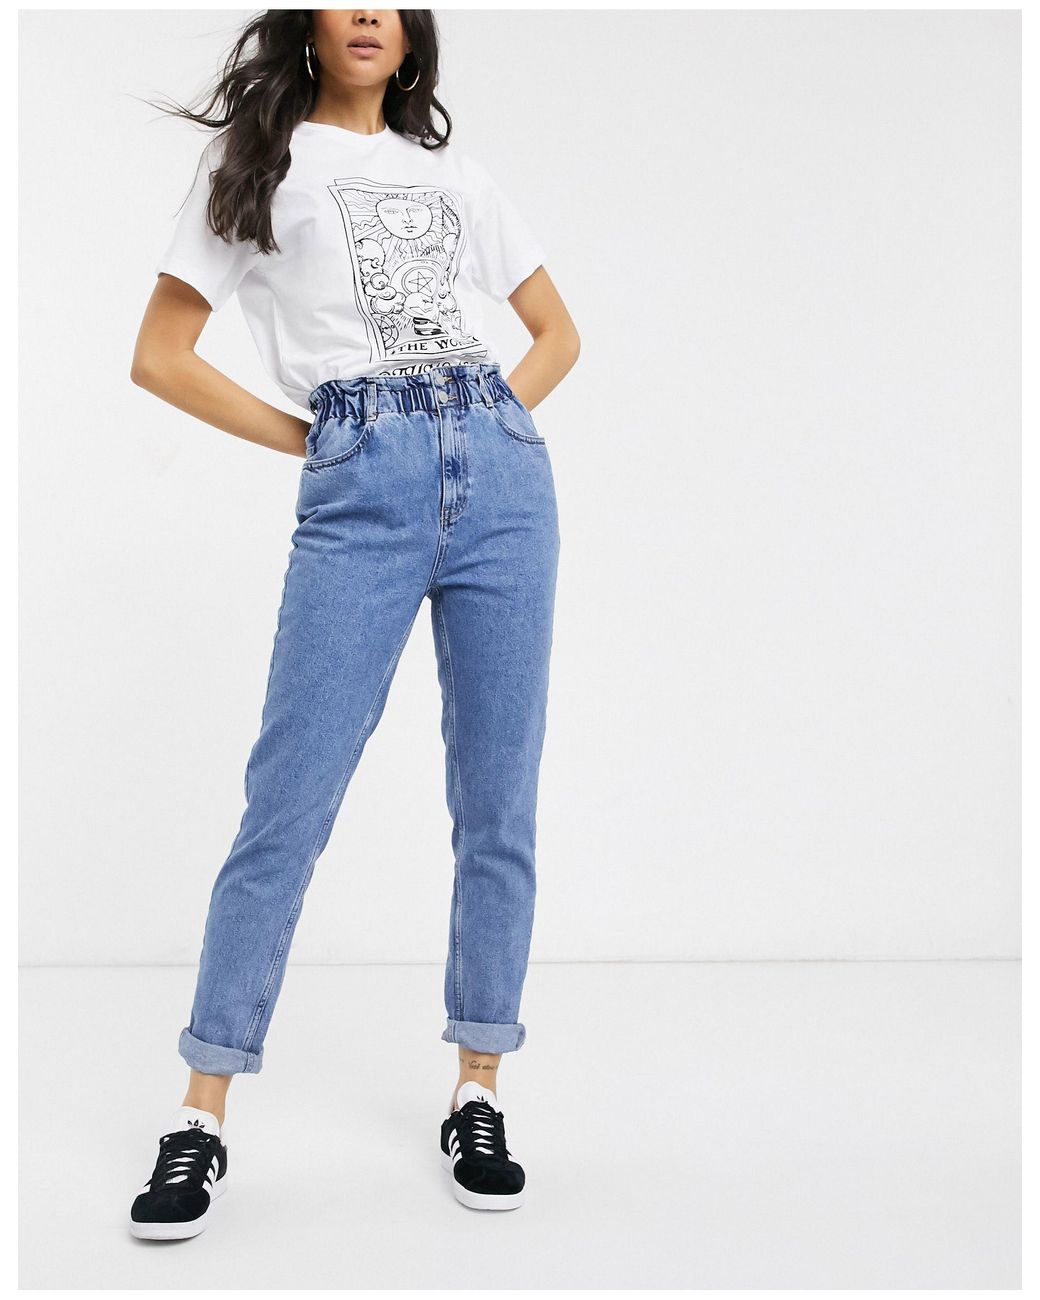 New Look Womens Jeans 